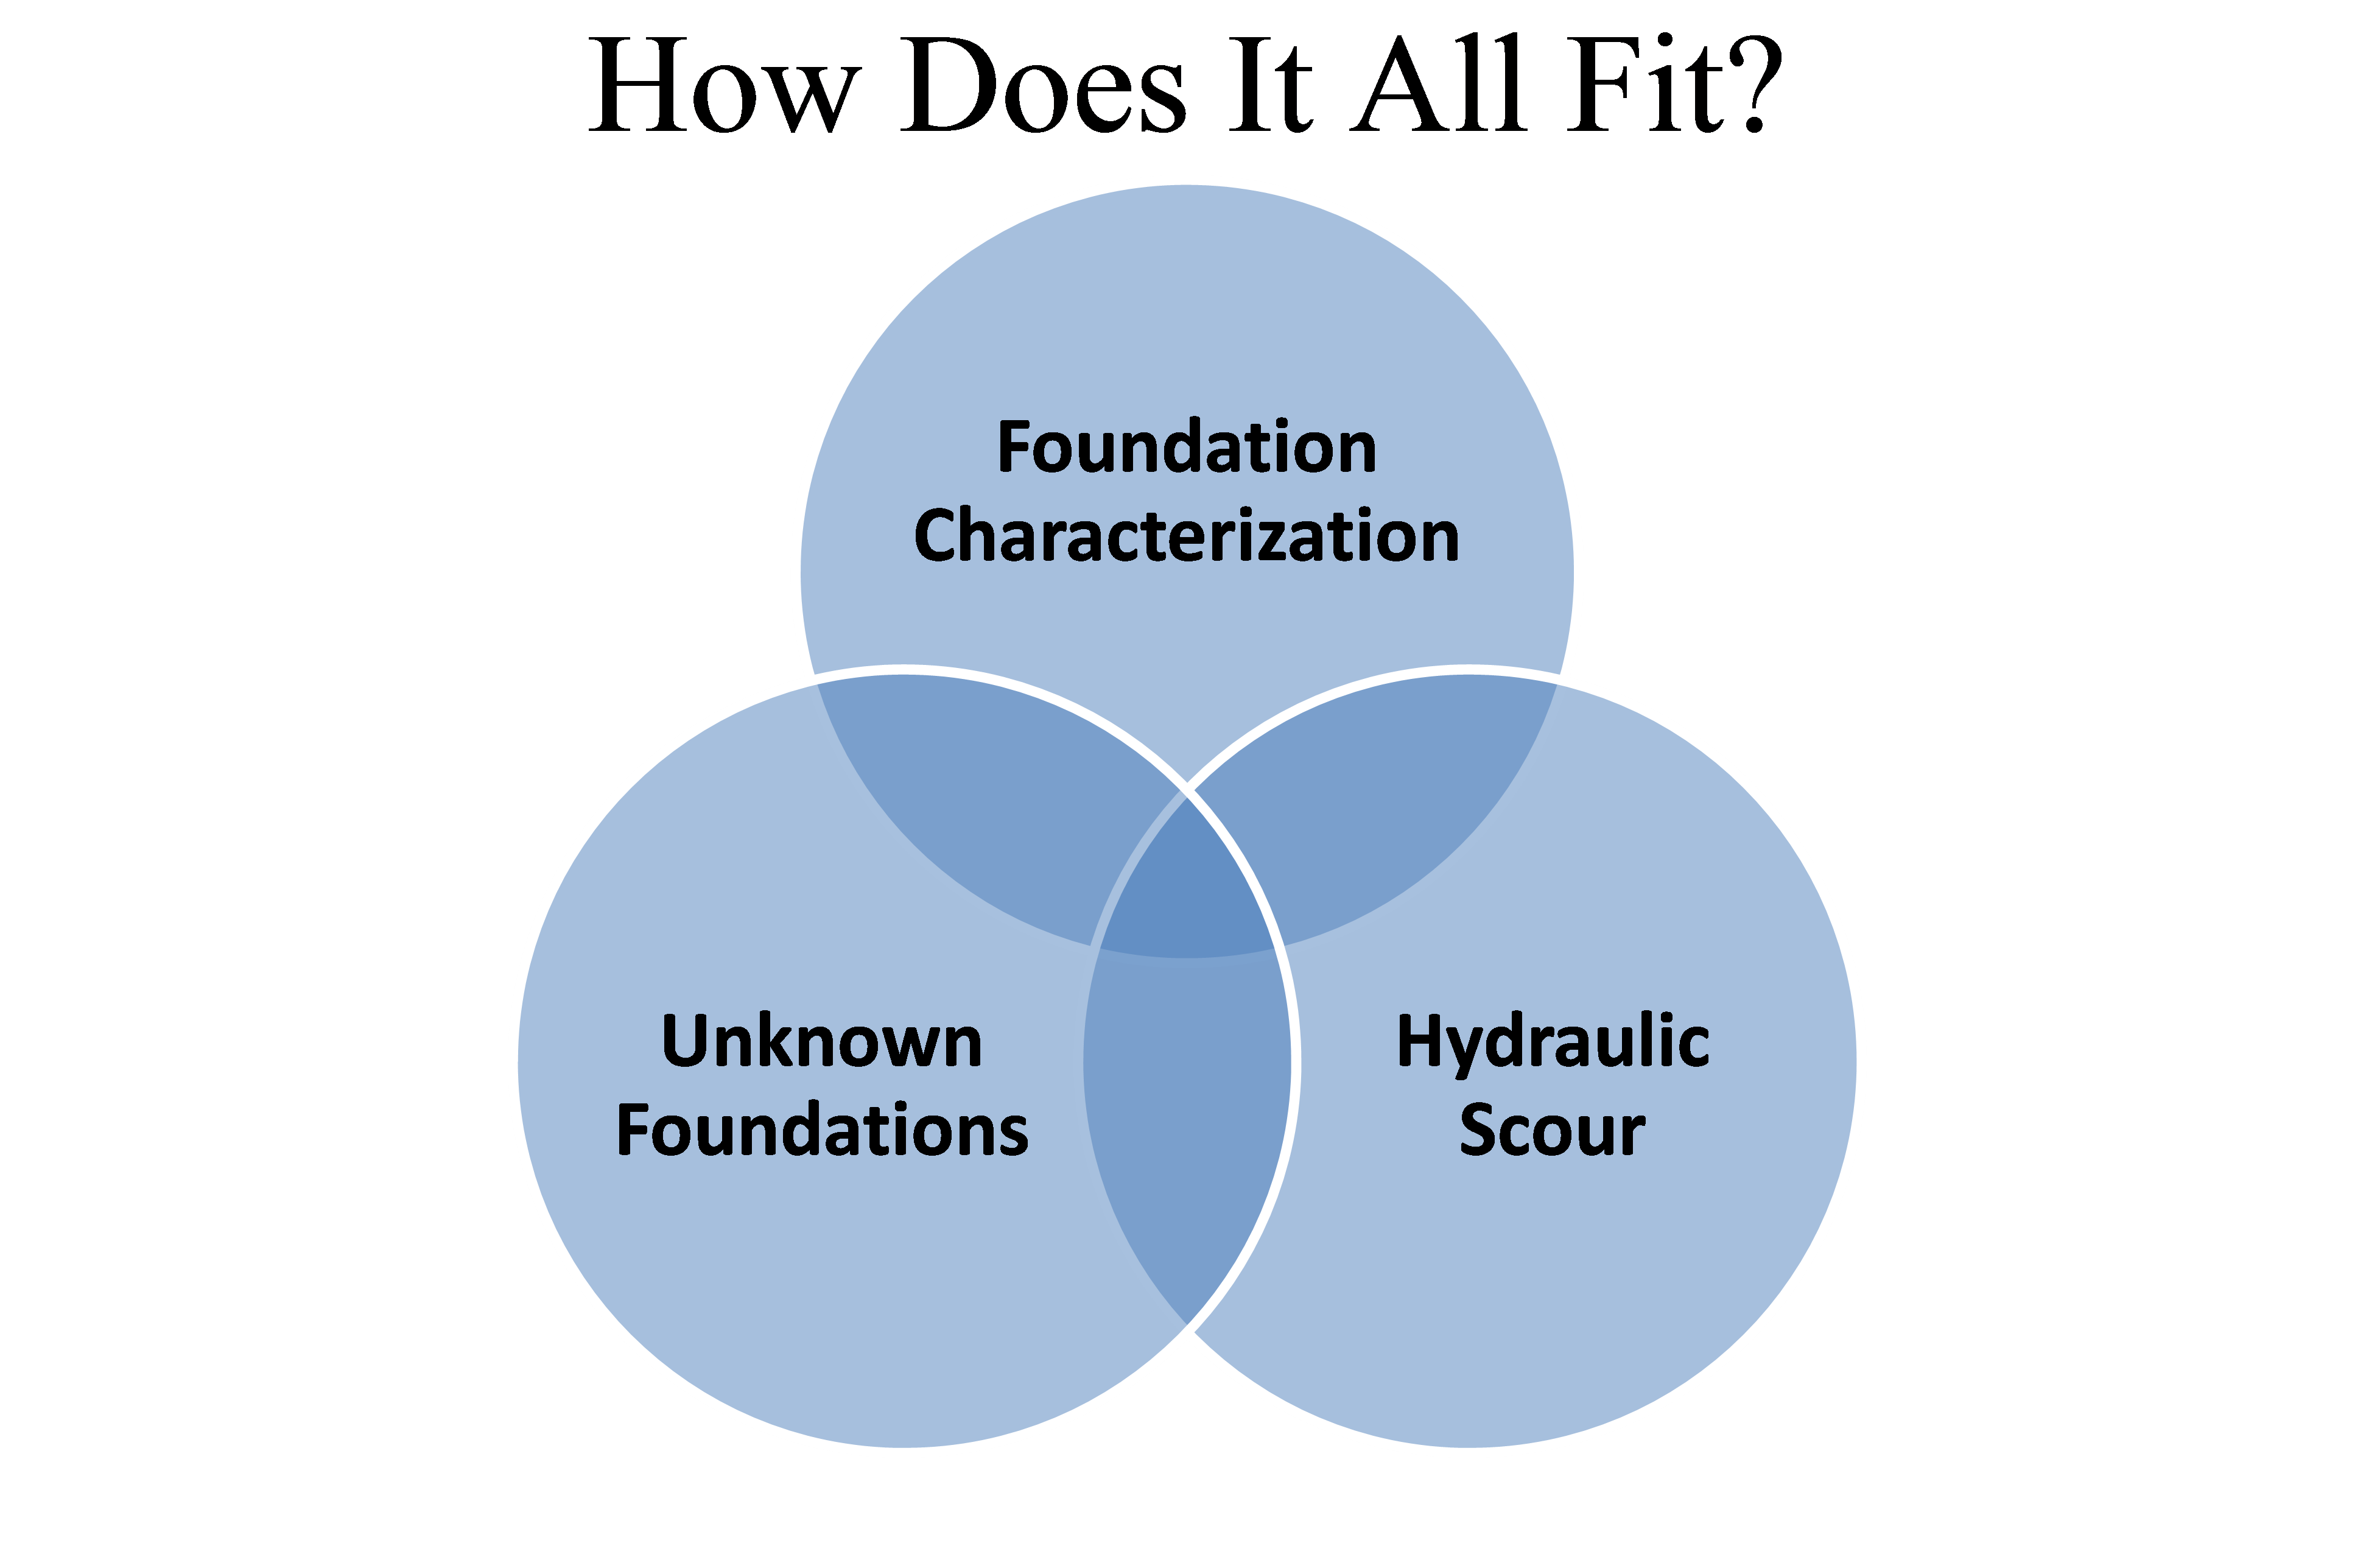 The figure shows a Venn diagram consisting of three intersecting circles. The top circle is titled “foundation characterization,” the bottom left circle is titled “unknown foundations,” and the bottom-right circle is titled “Hydraulic scour.” About 30 percent of the area of each circle intersects two other circles.